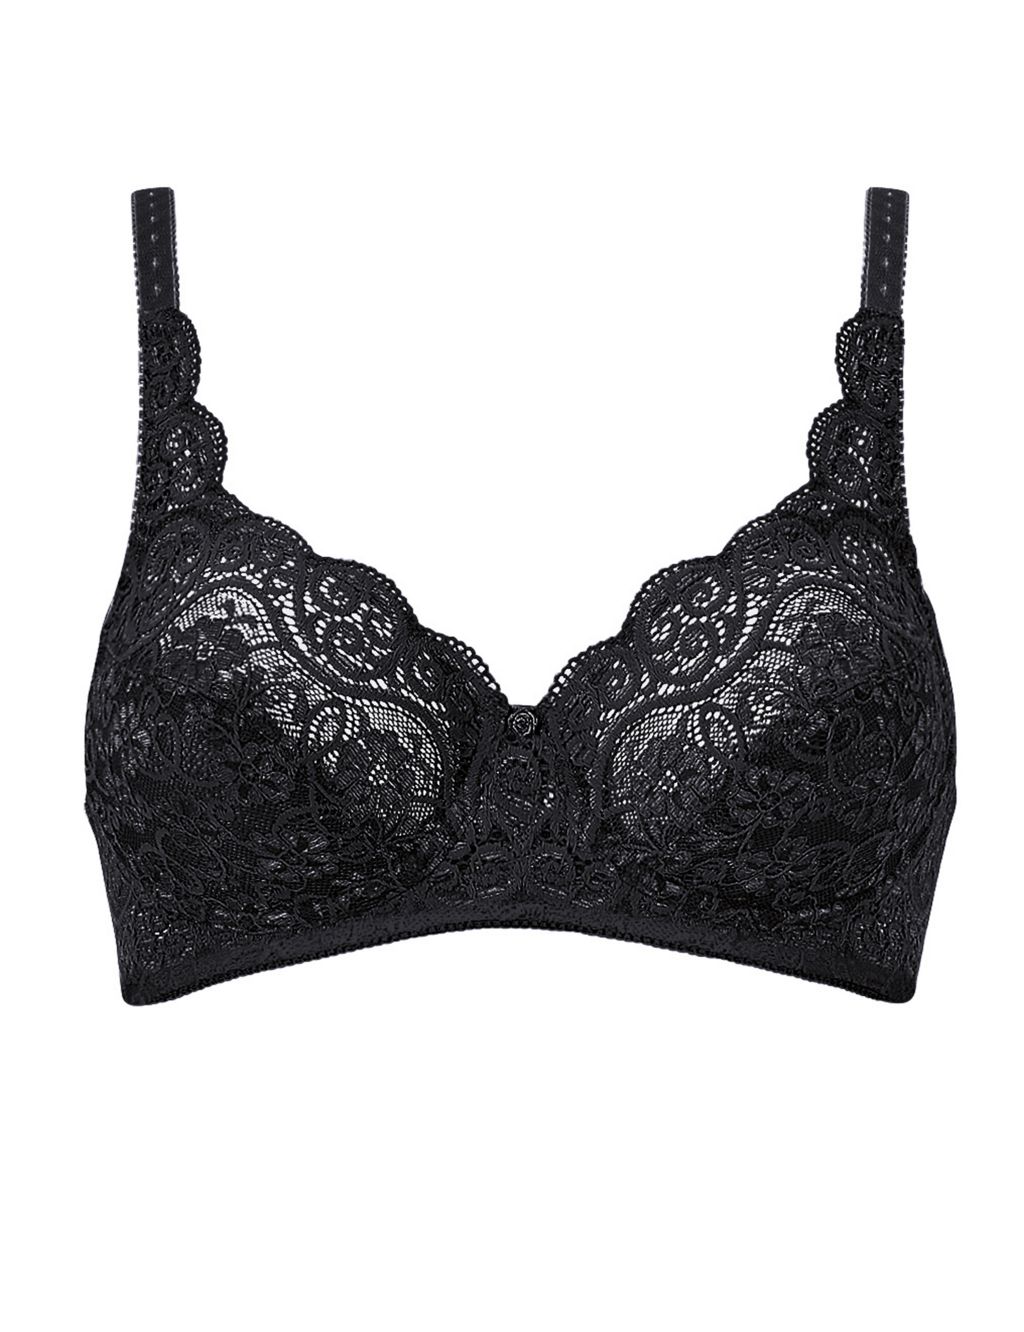 Amourette 300 Lace Non Wired Full Cup Bra image 2